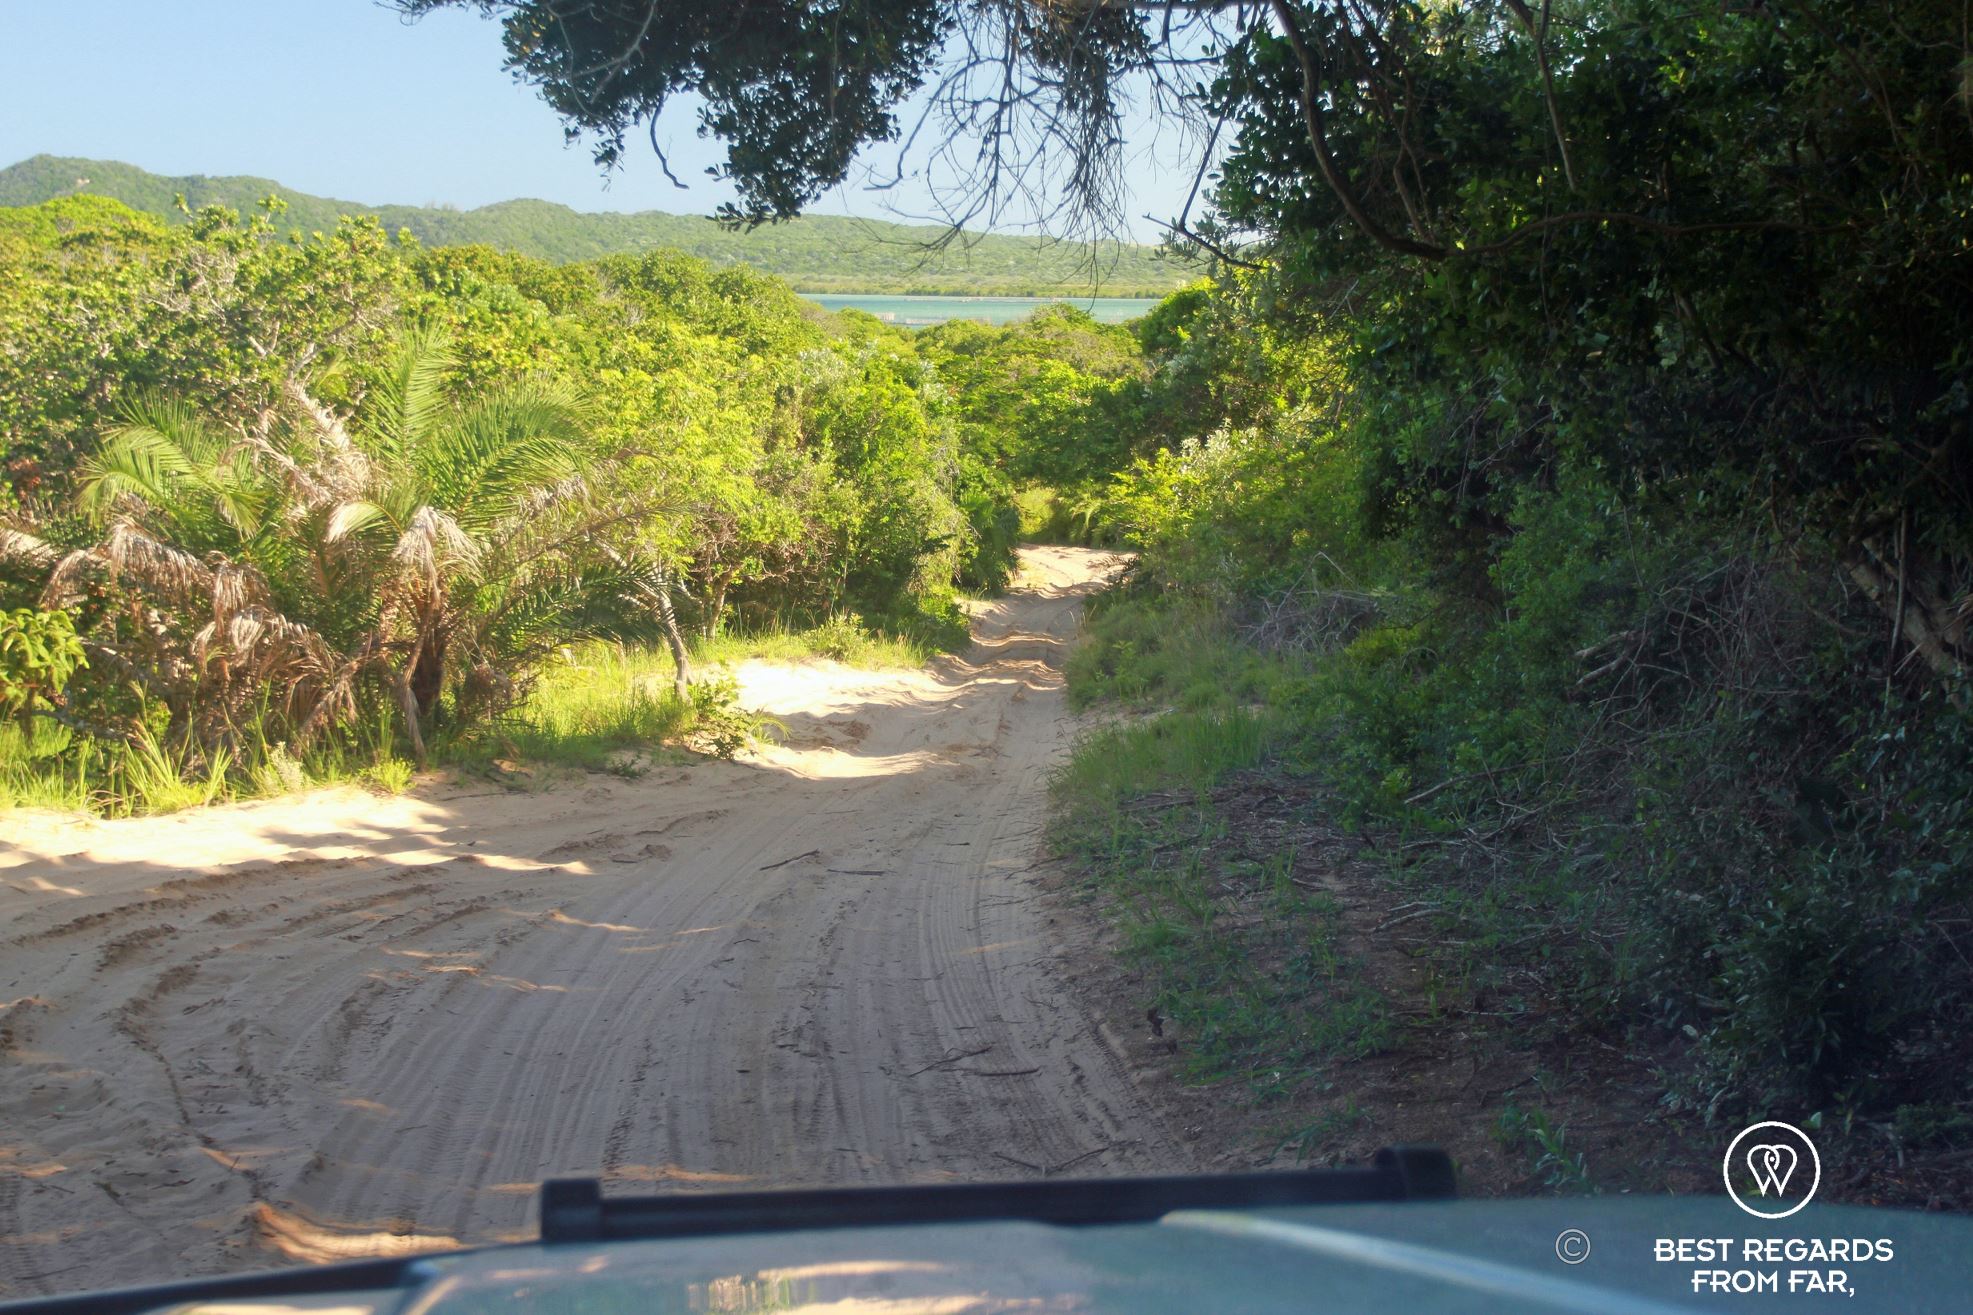 4x4 hood on a sand track to Black Rock Beach, South Africa